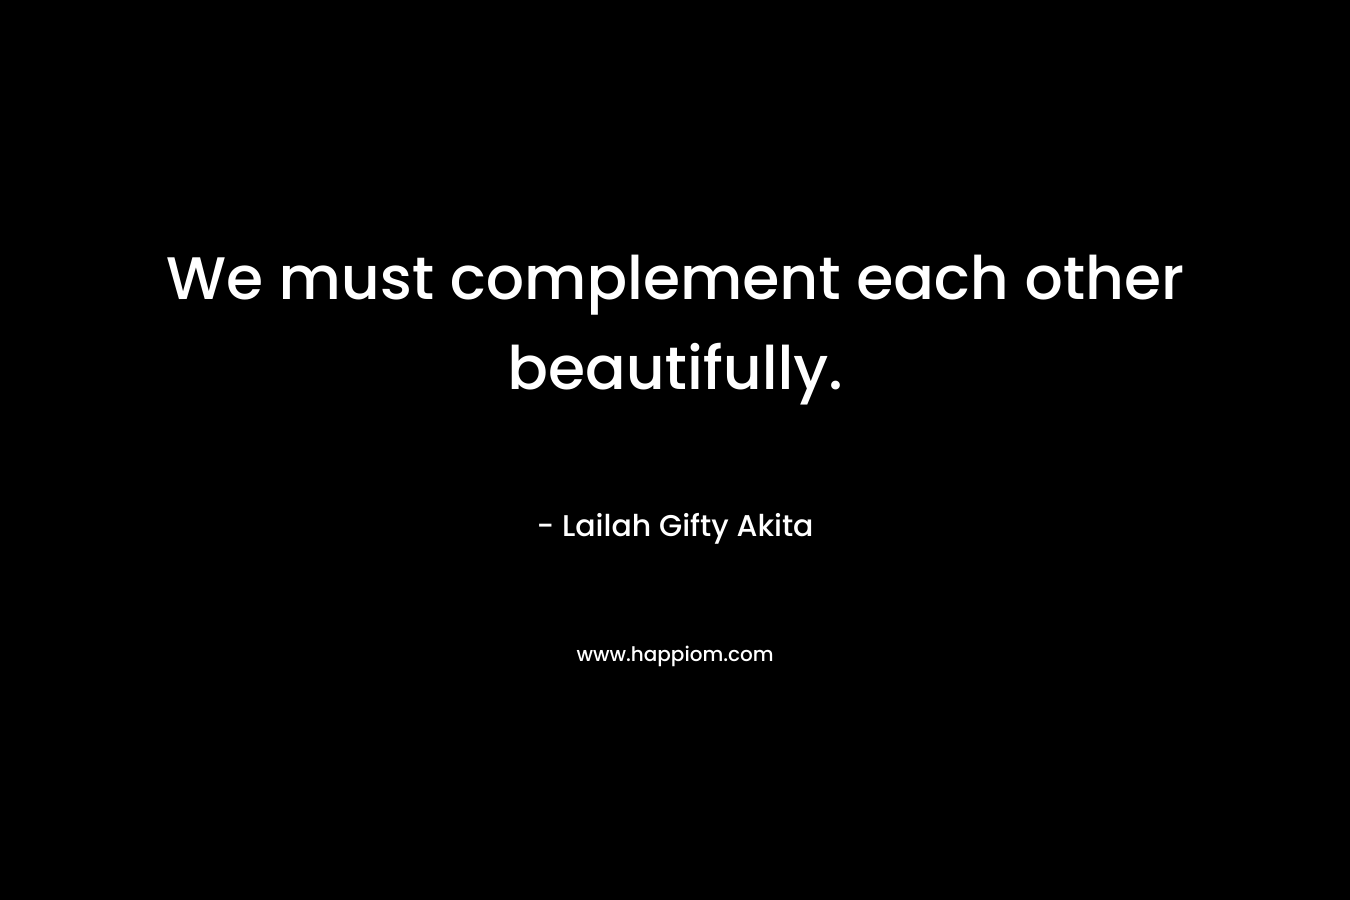 We must complement each other beautifully.